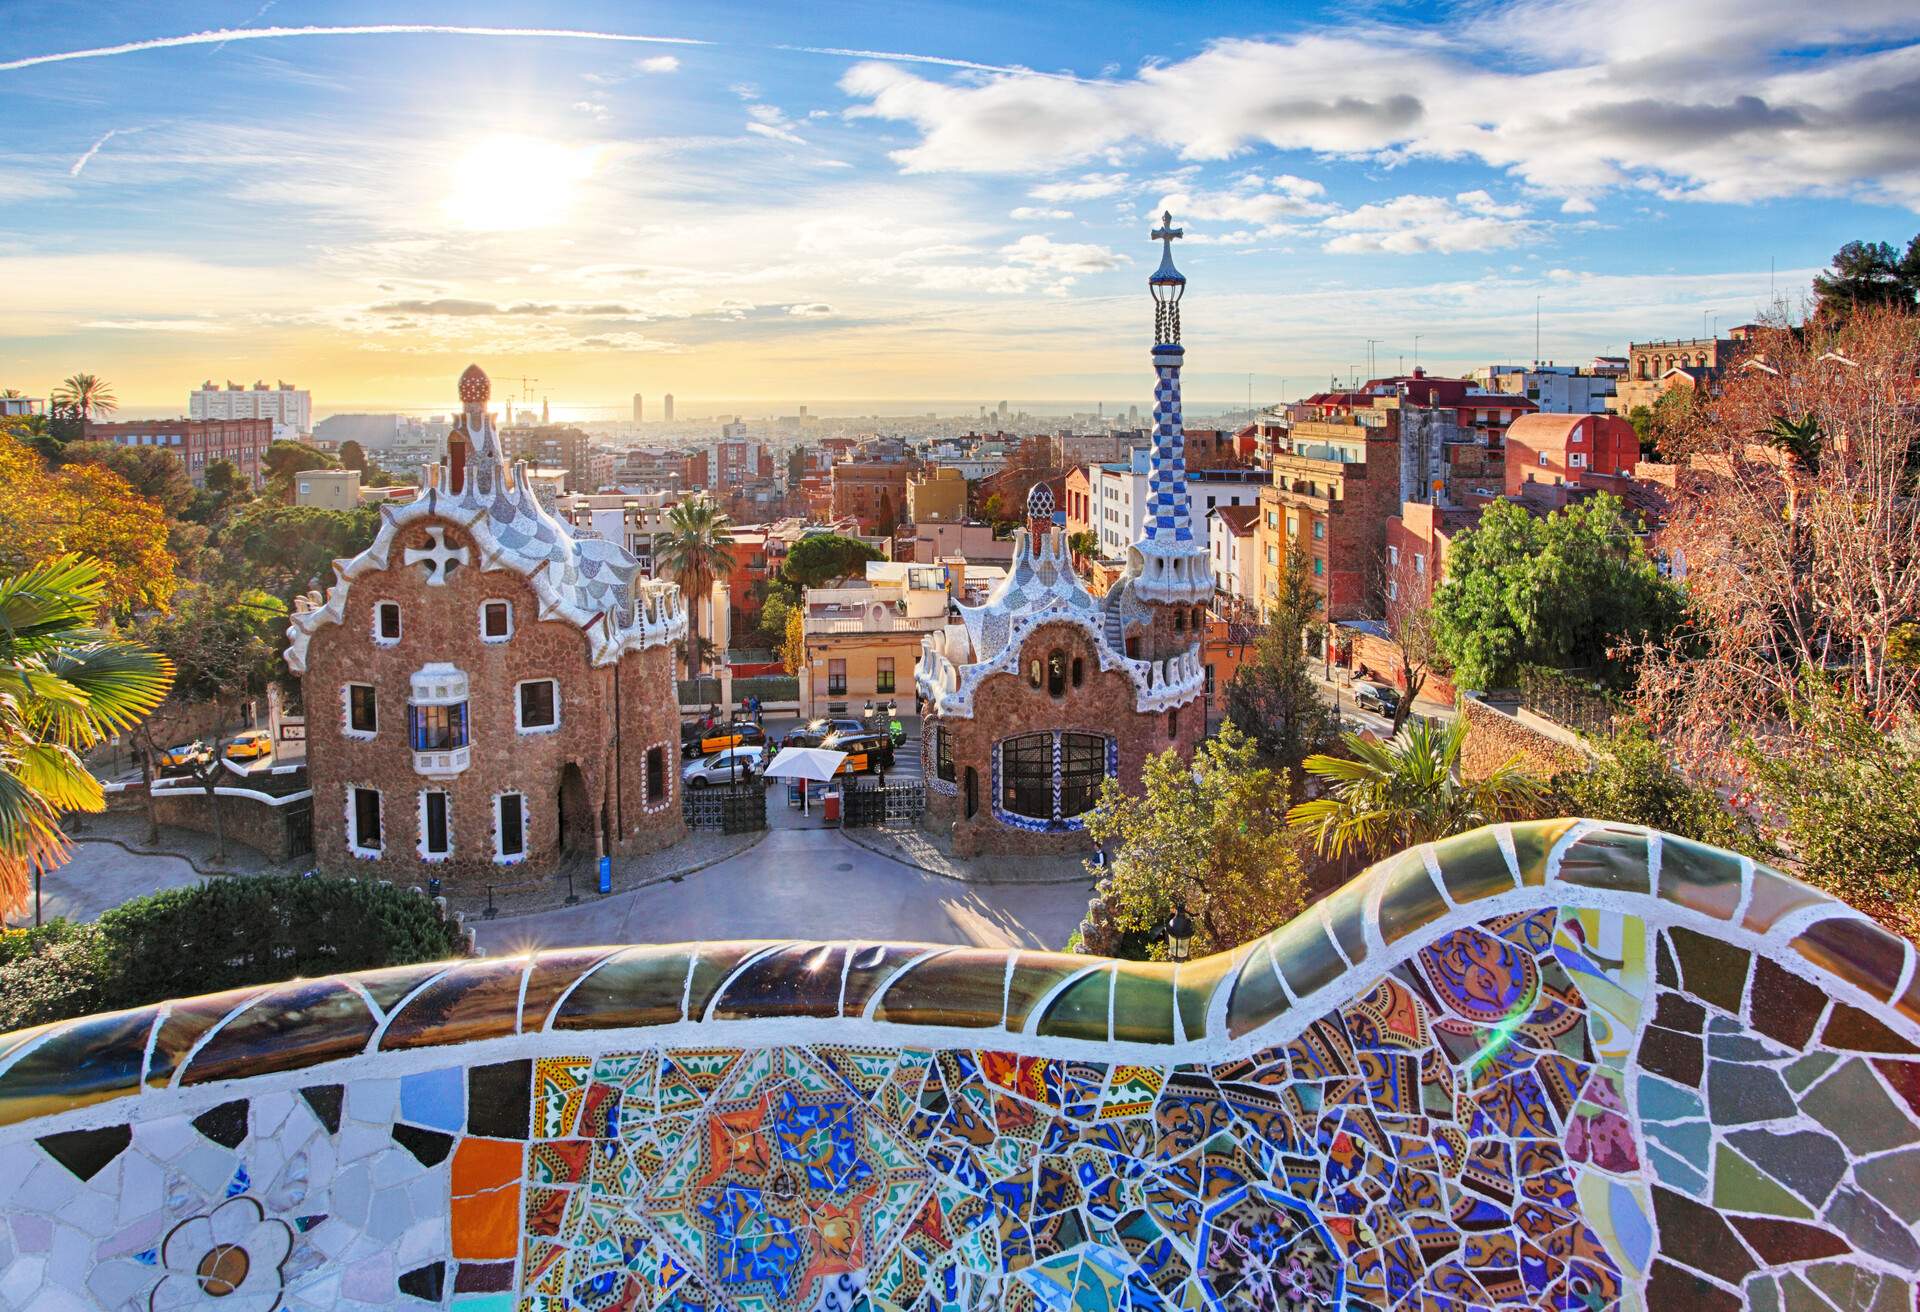 dest_spain_barcelona_park-guell_gettyimages-511515106_universal_within-usage-period_45760